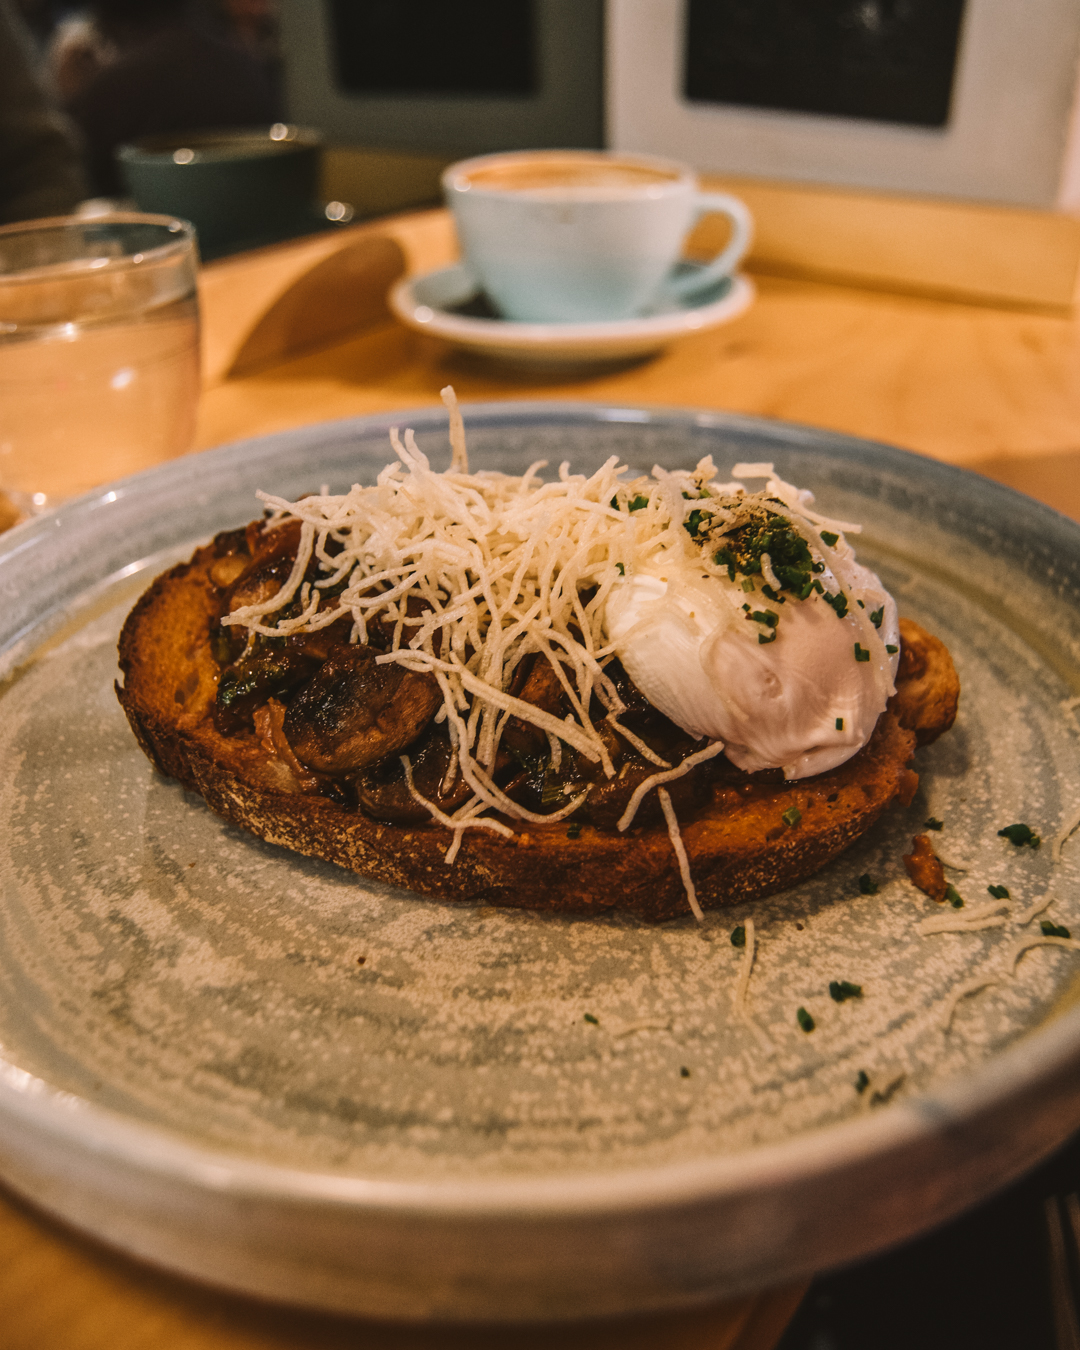 Poached egg with mushrooms on toast Enjoy brunch together at one of the many cafes in York